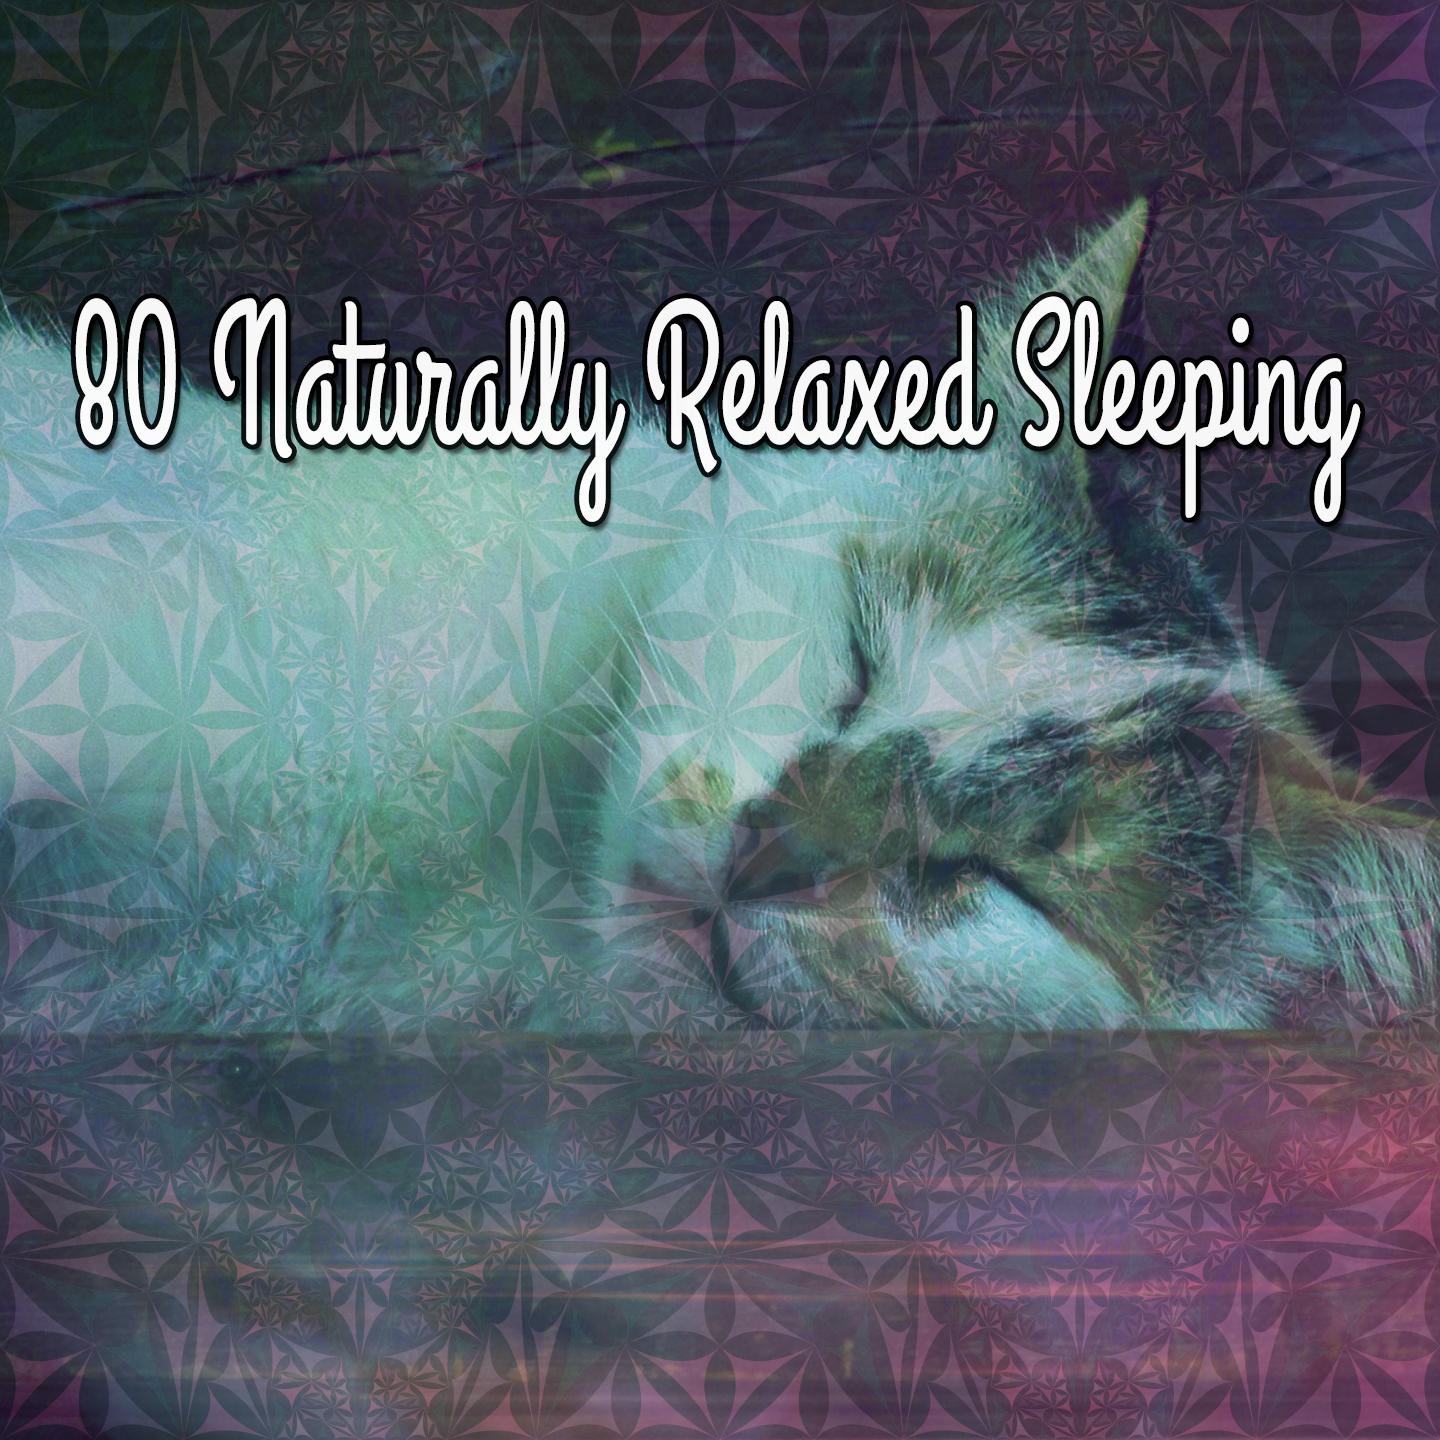 80 Naturally Relaxed Sleeping